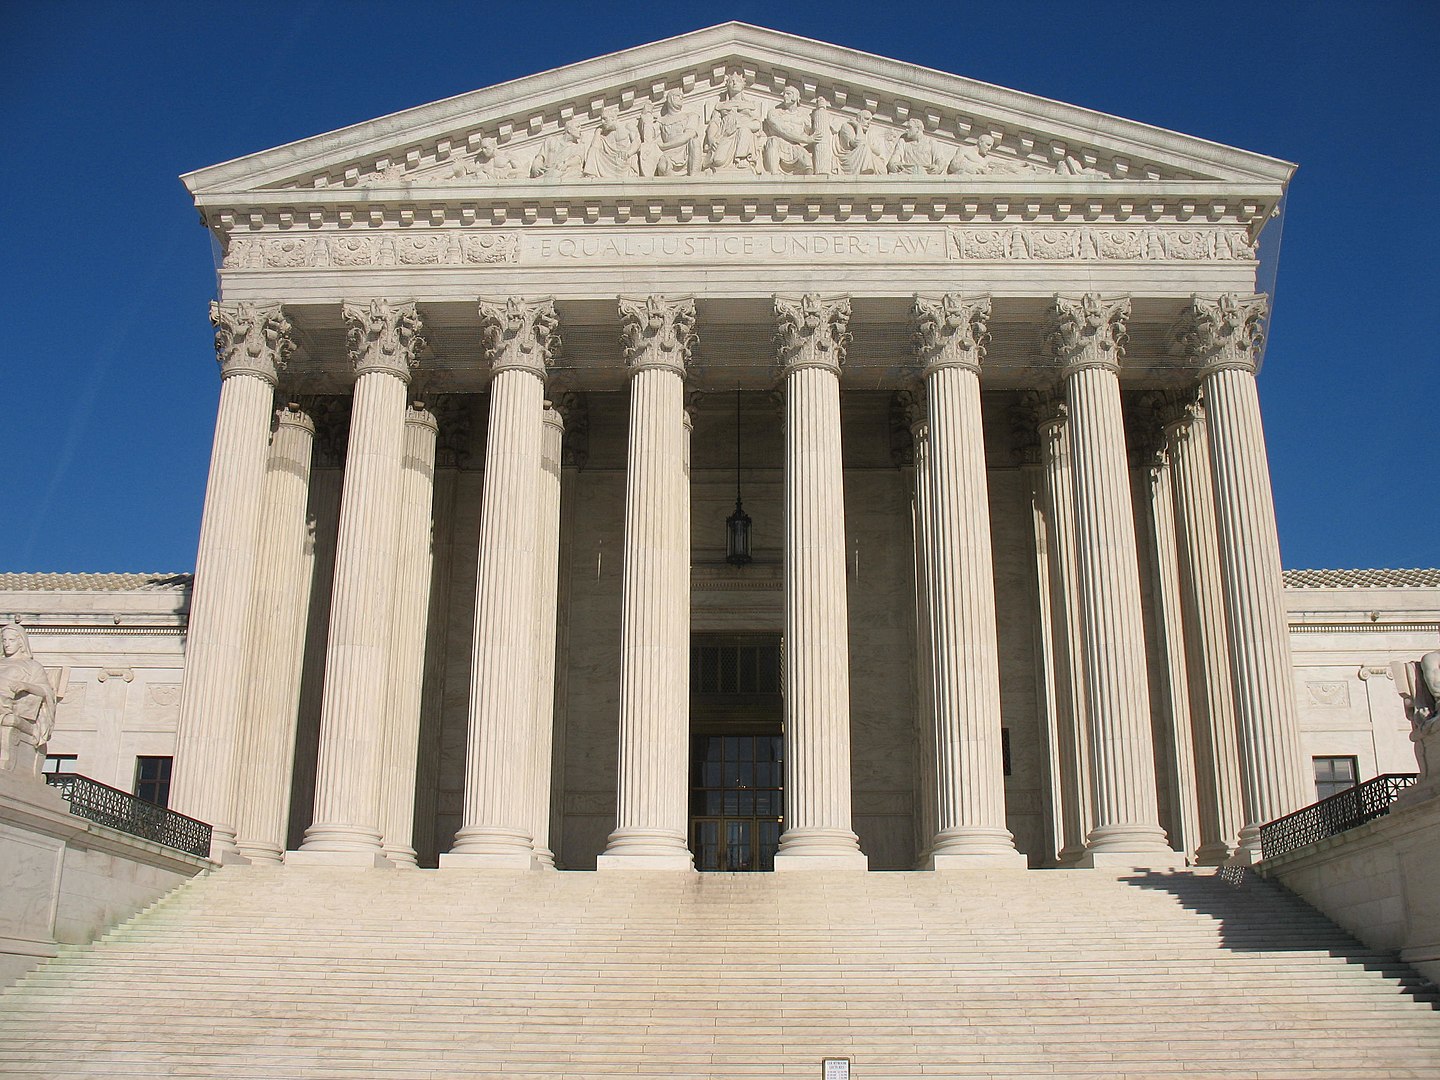 The Supreme Court of the United States. Photo by Kjetil Ree.